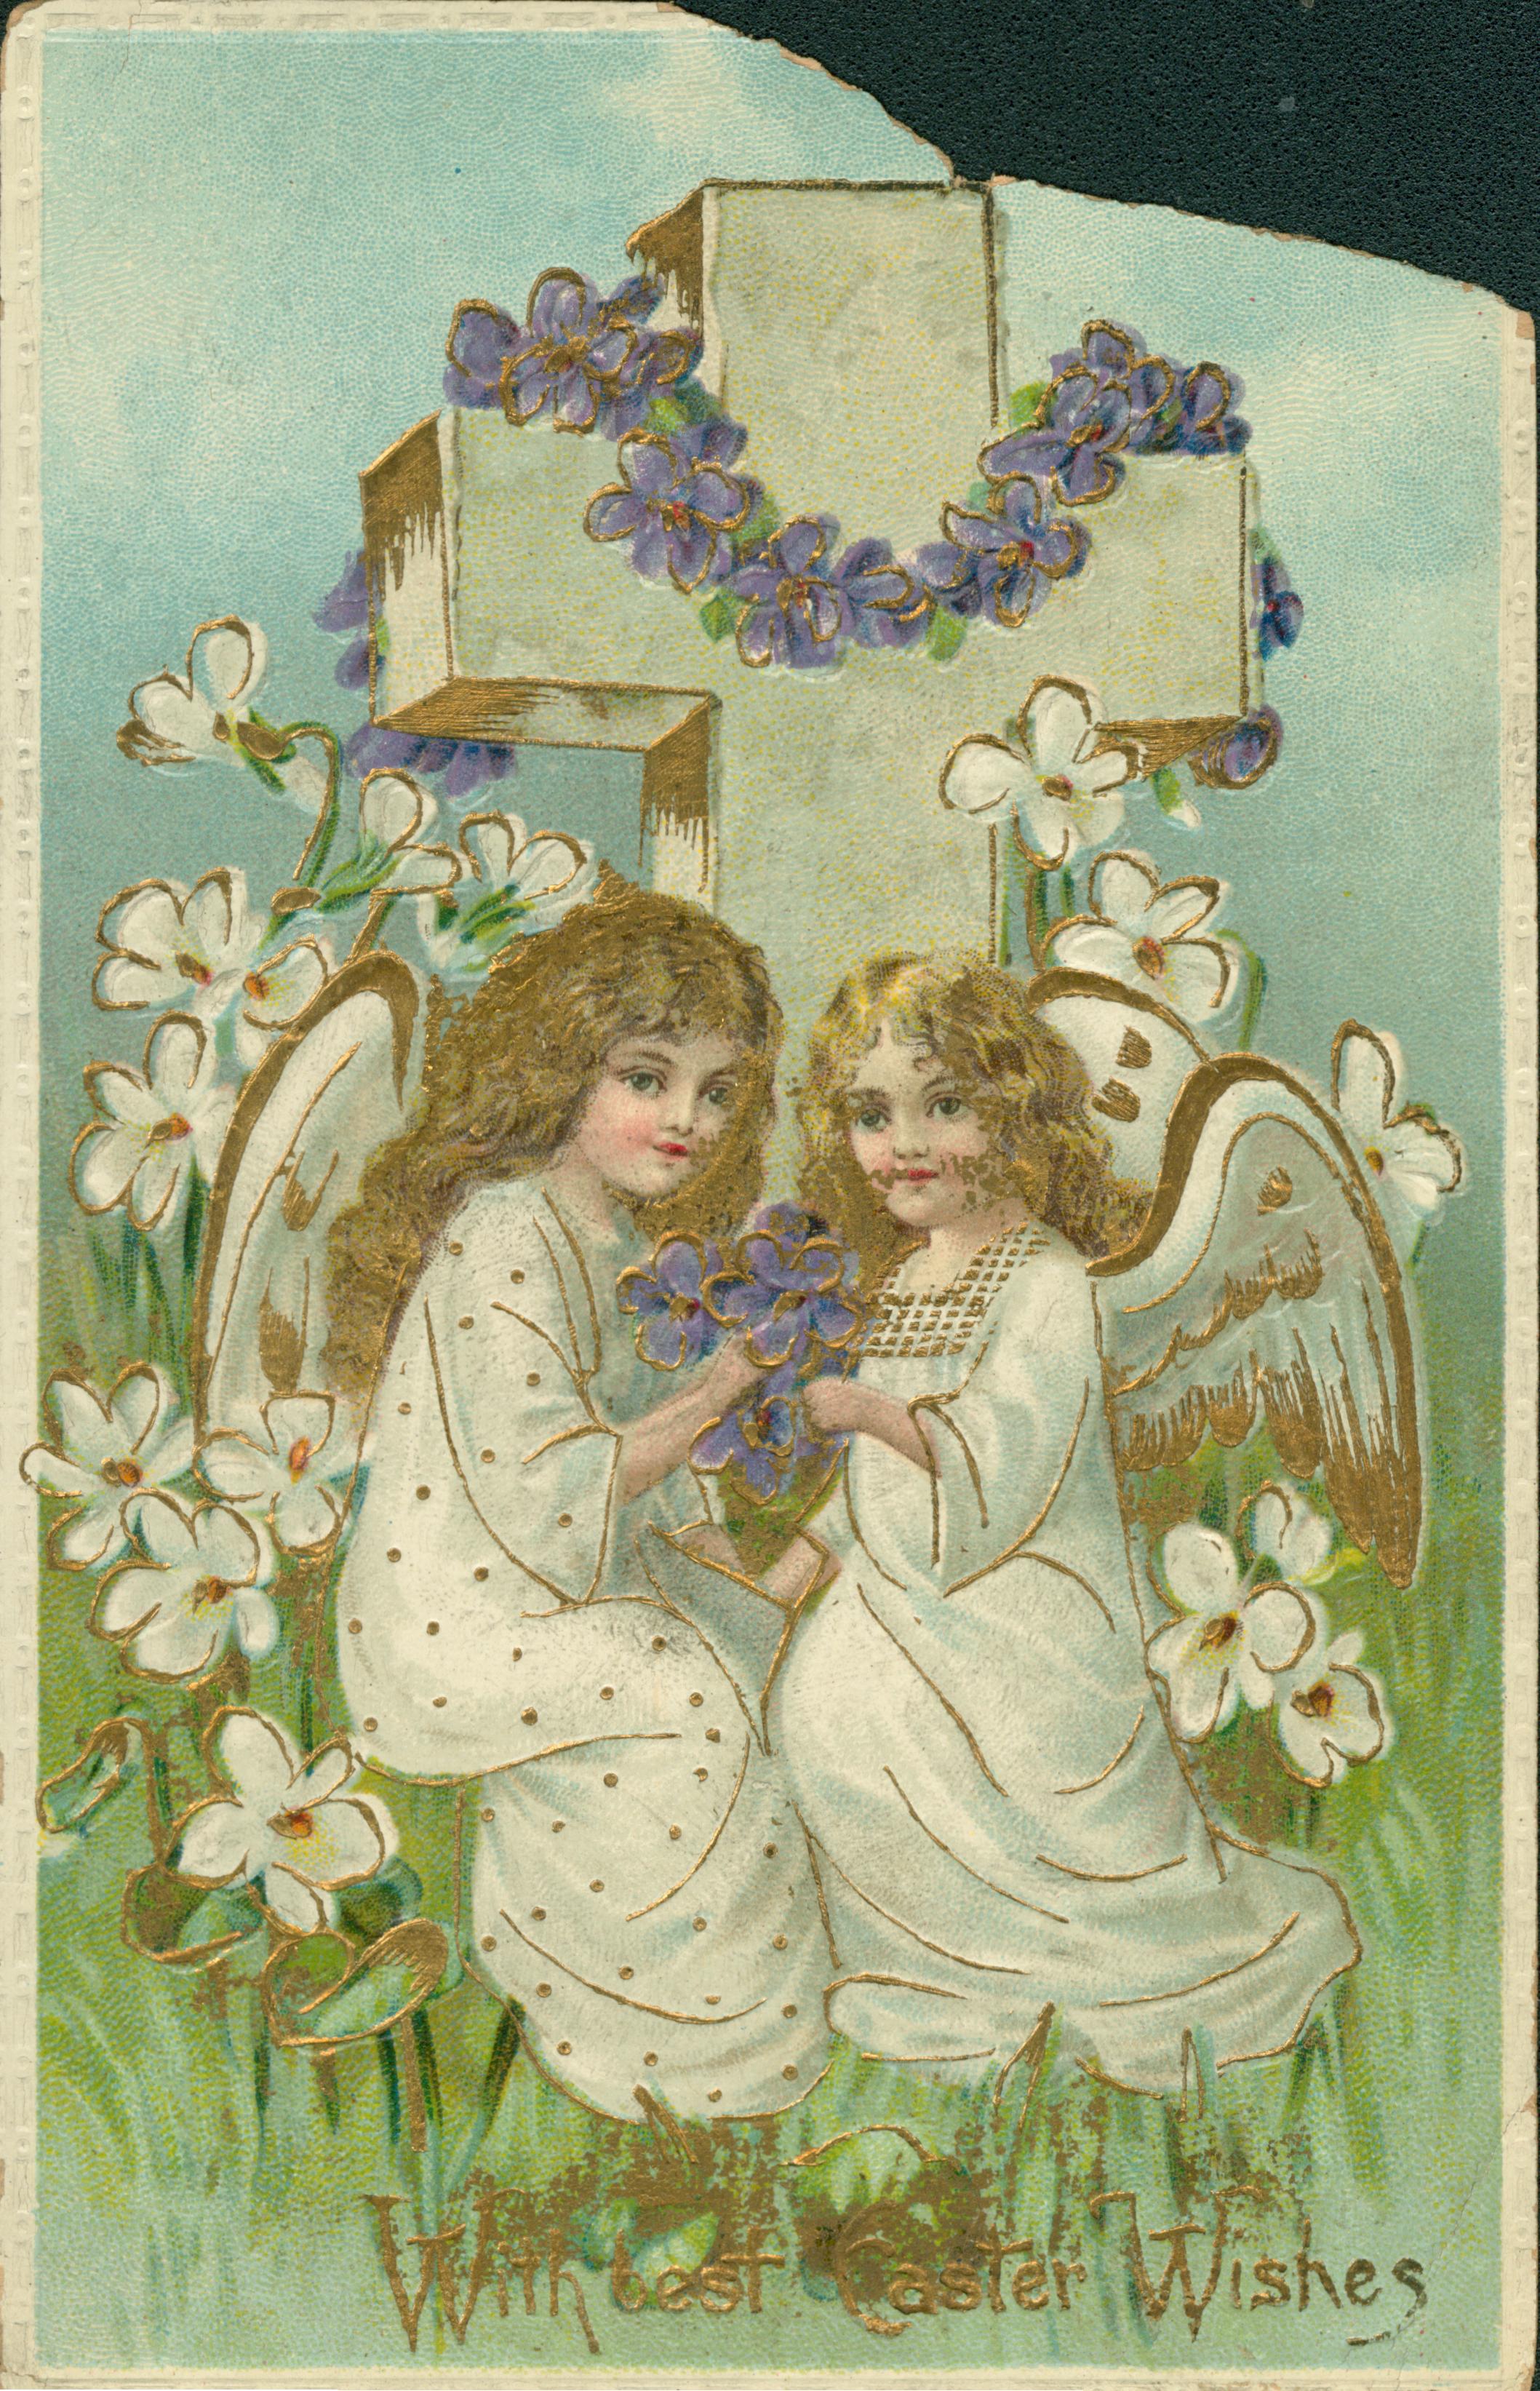 Two angels in front of a cross holding flowers.